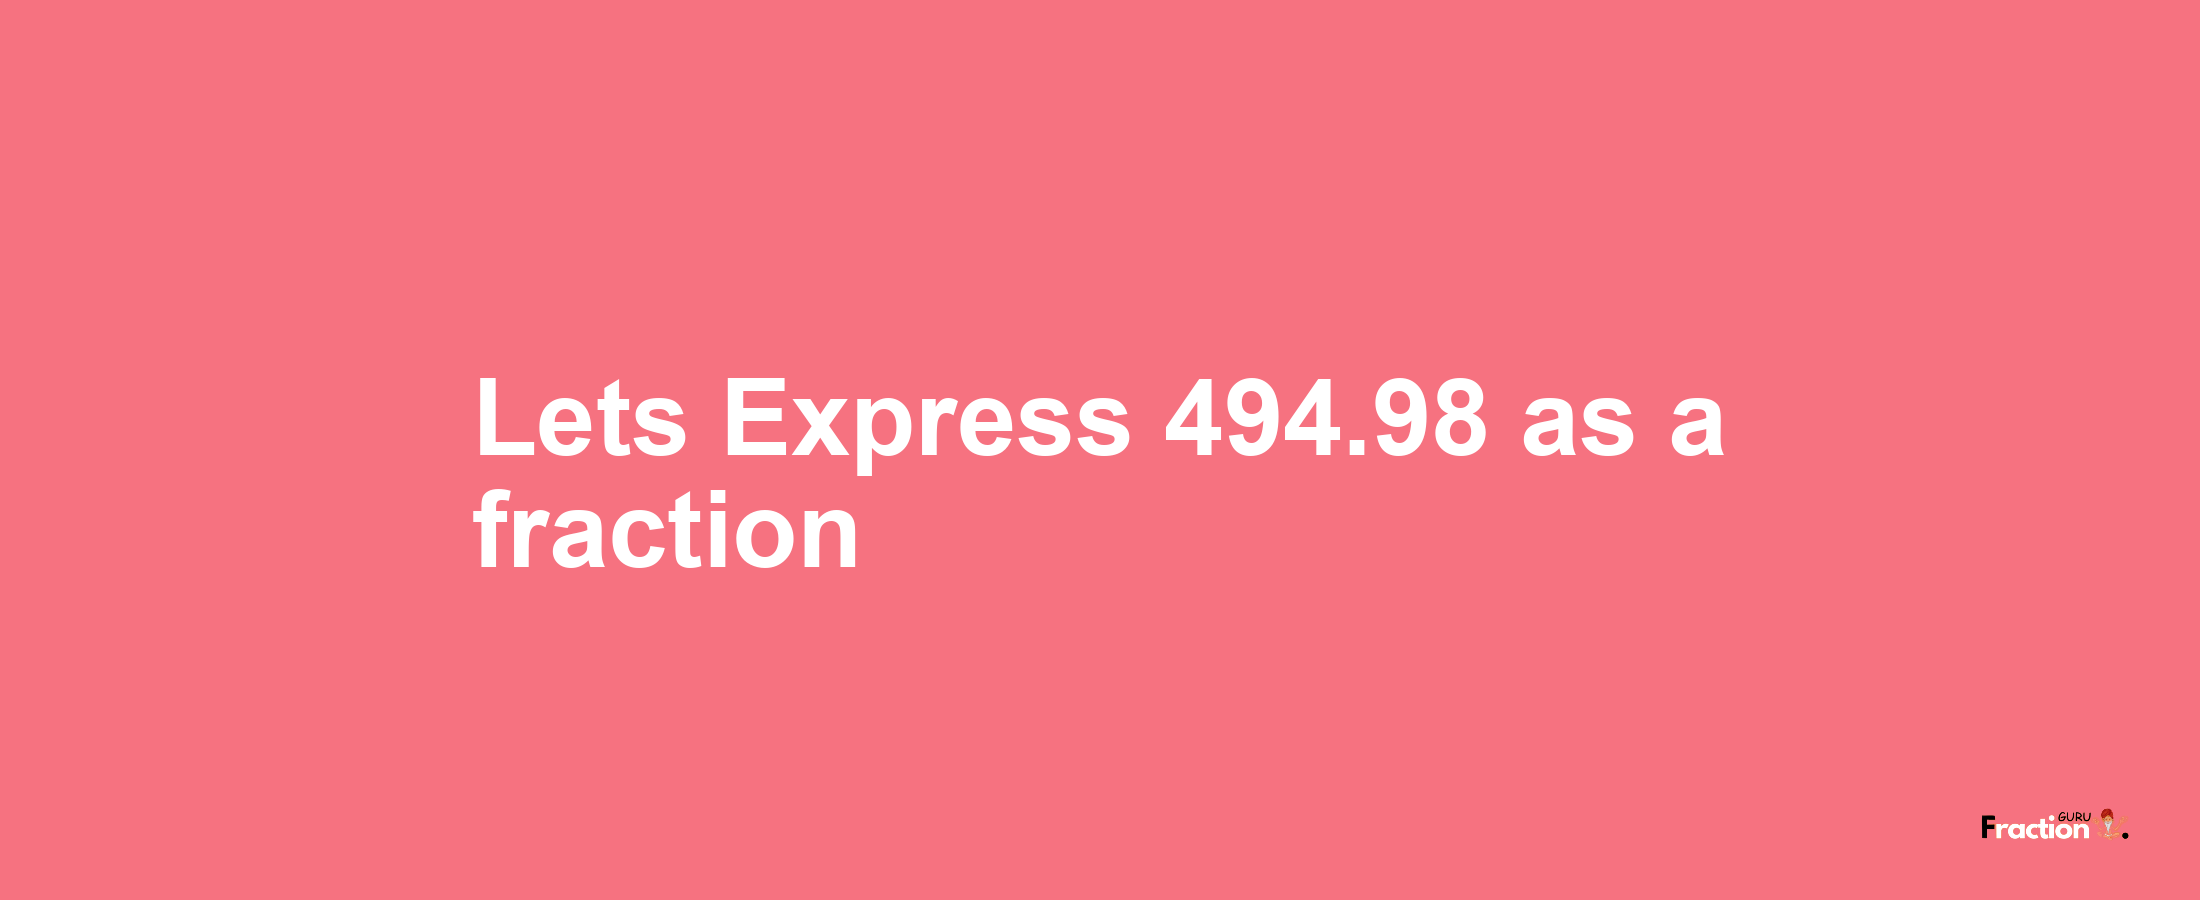 Lets Express 494.98 as afraction